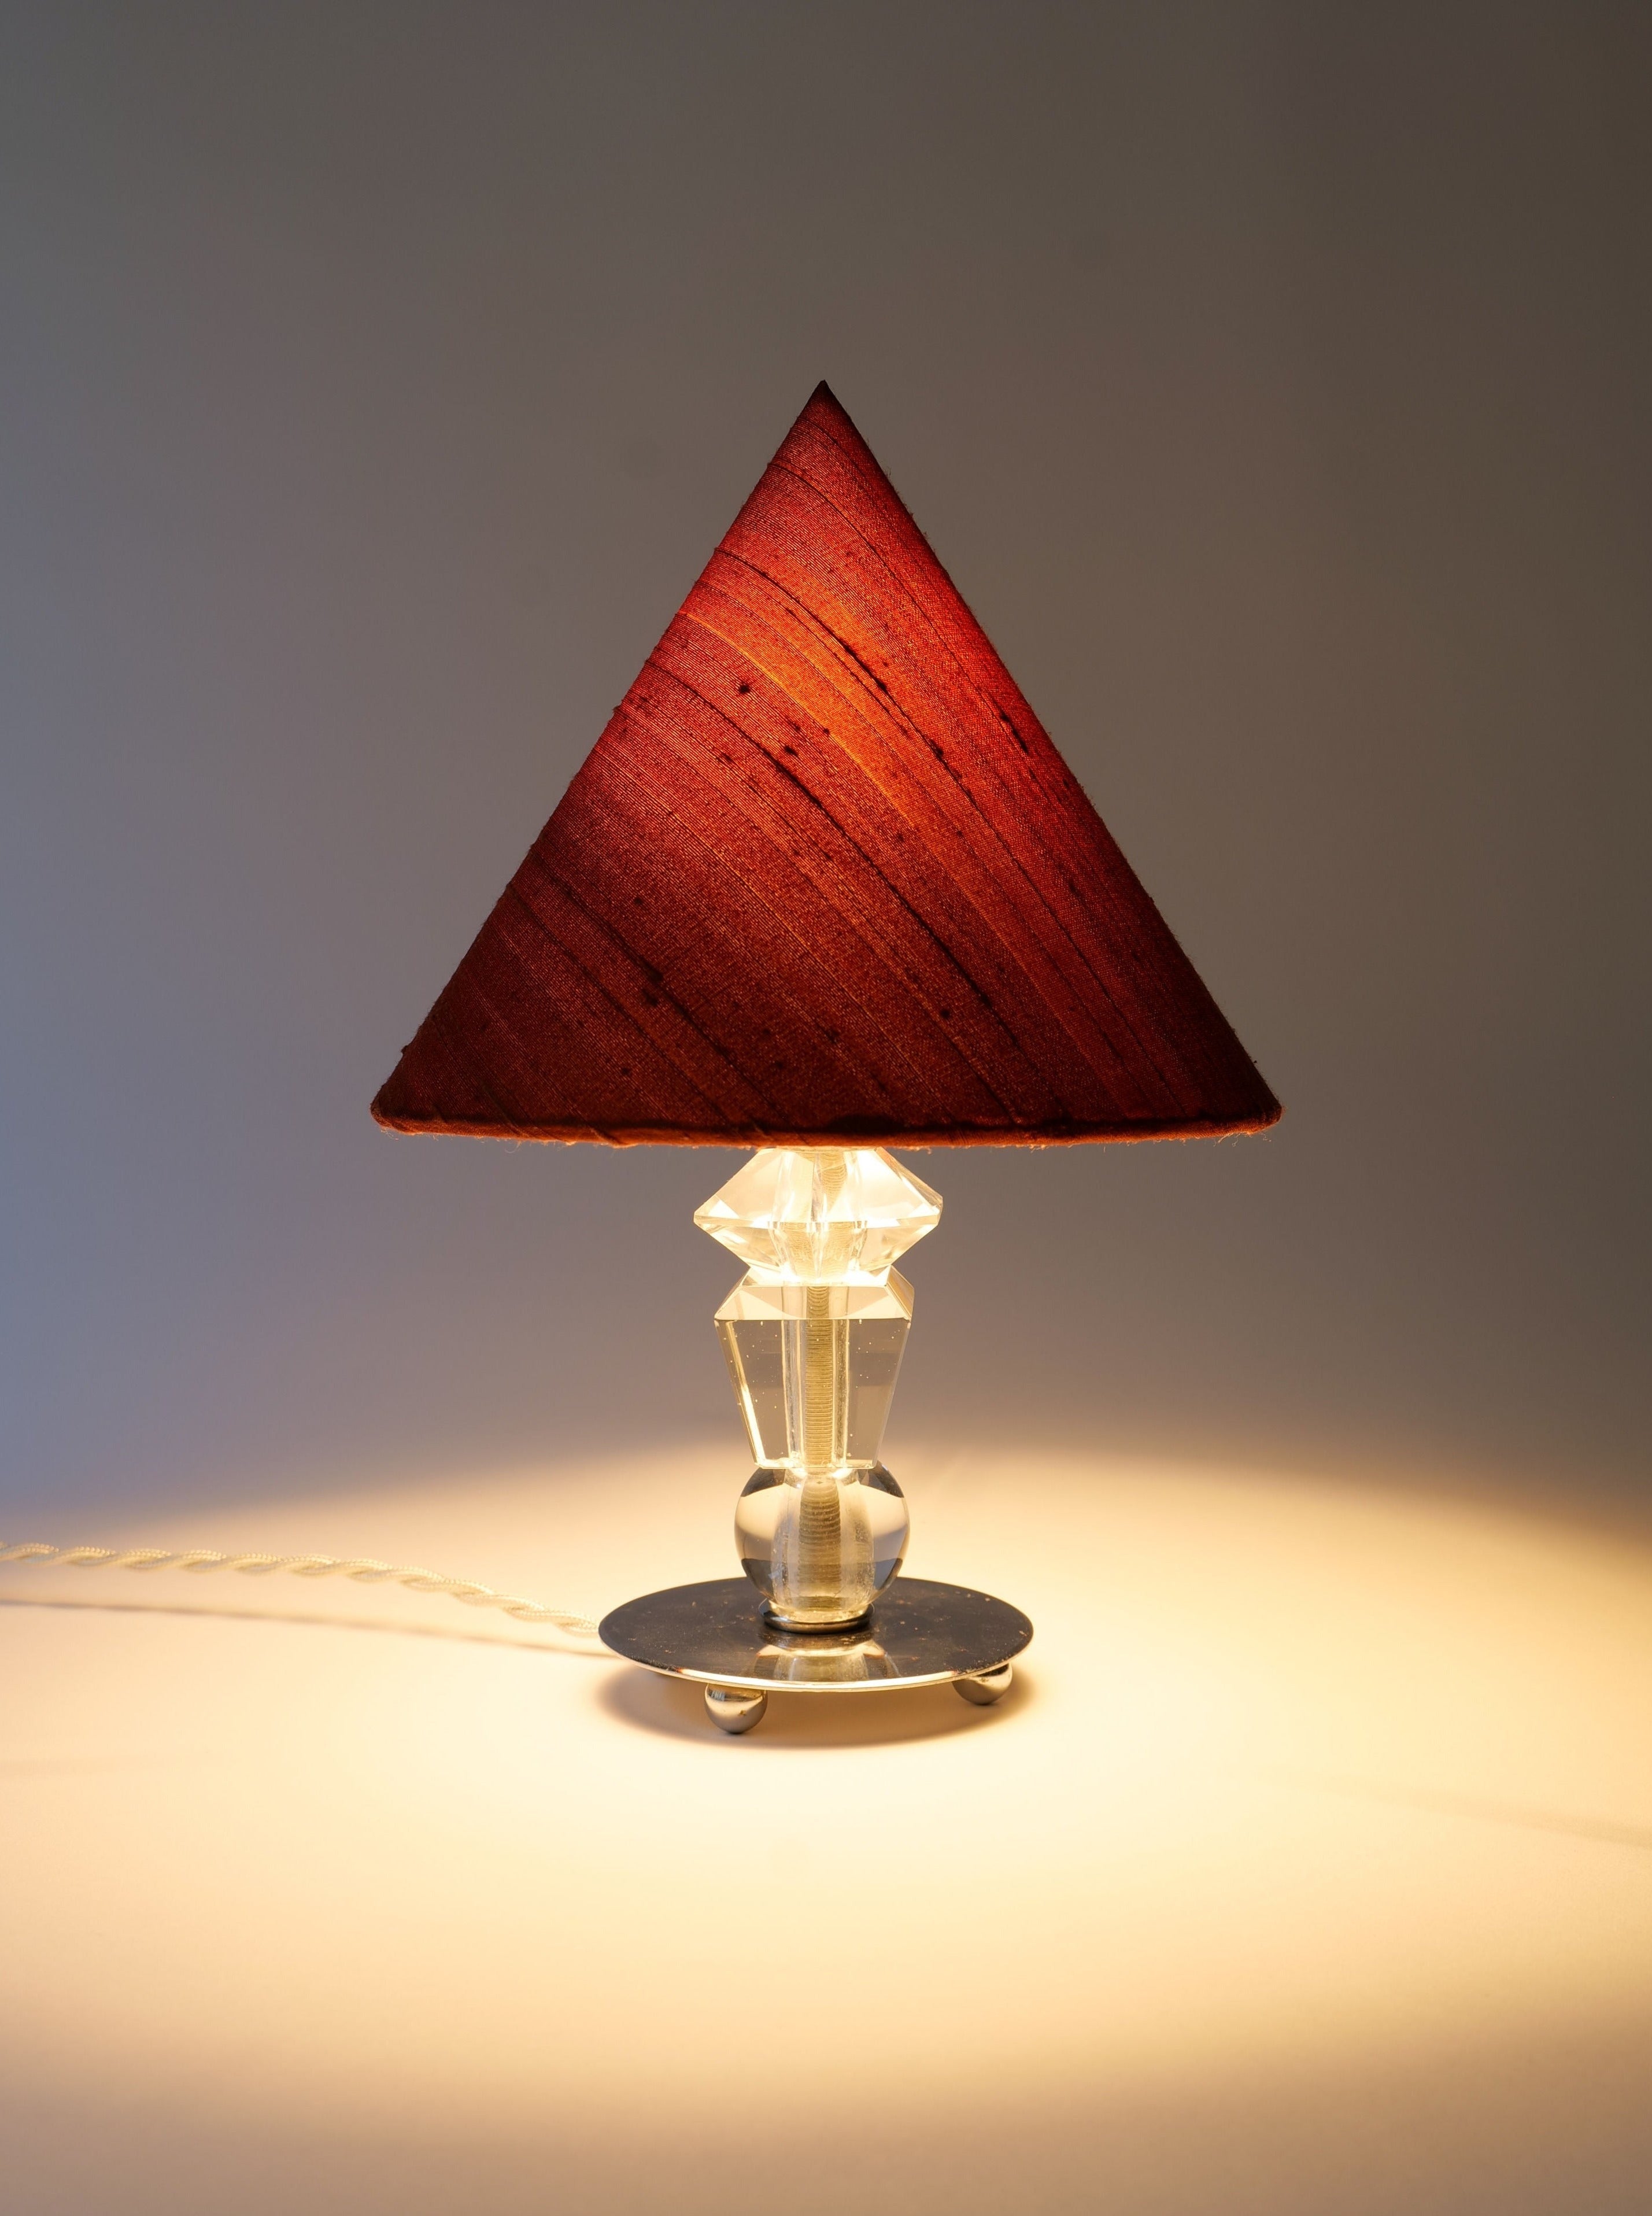 A Deco Crystal Table Lamp from the Collection apart with a triangular, red-shaded lampshade illuminated from within, set on a stylized Art Deco silver base, with a lit bulb visible and a subtle glow casting on a plain